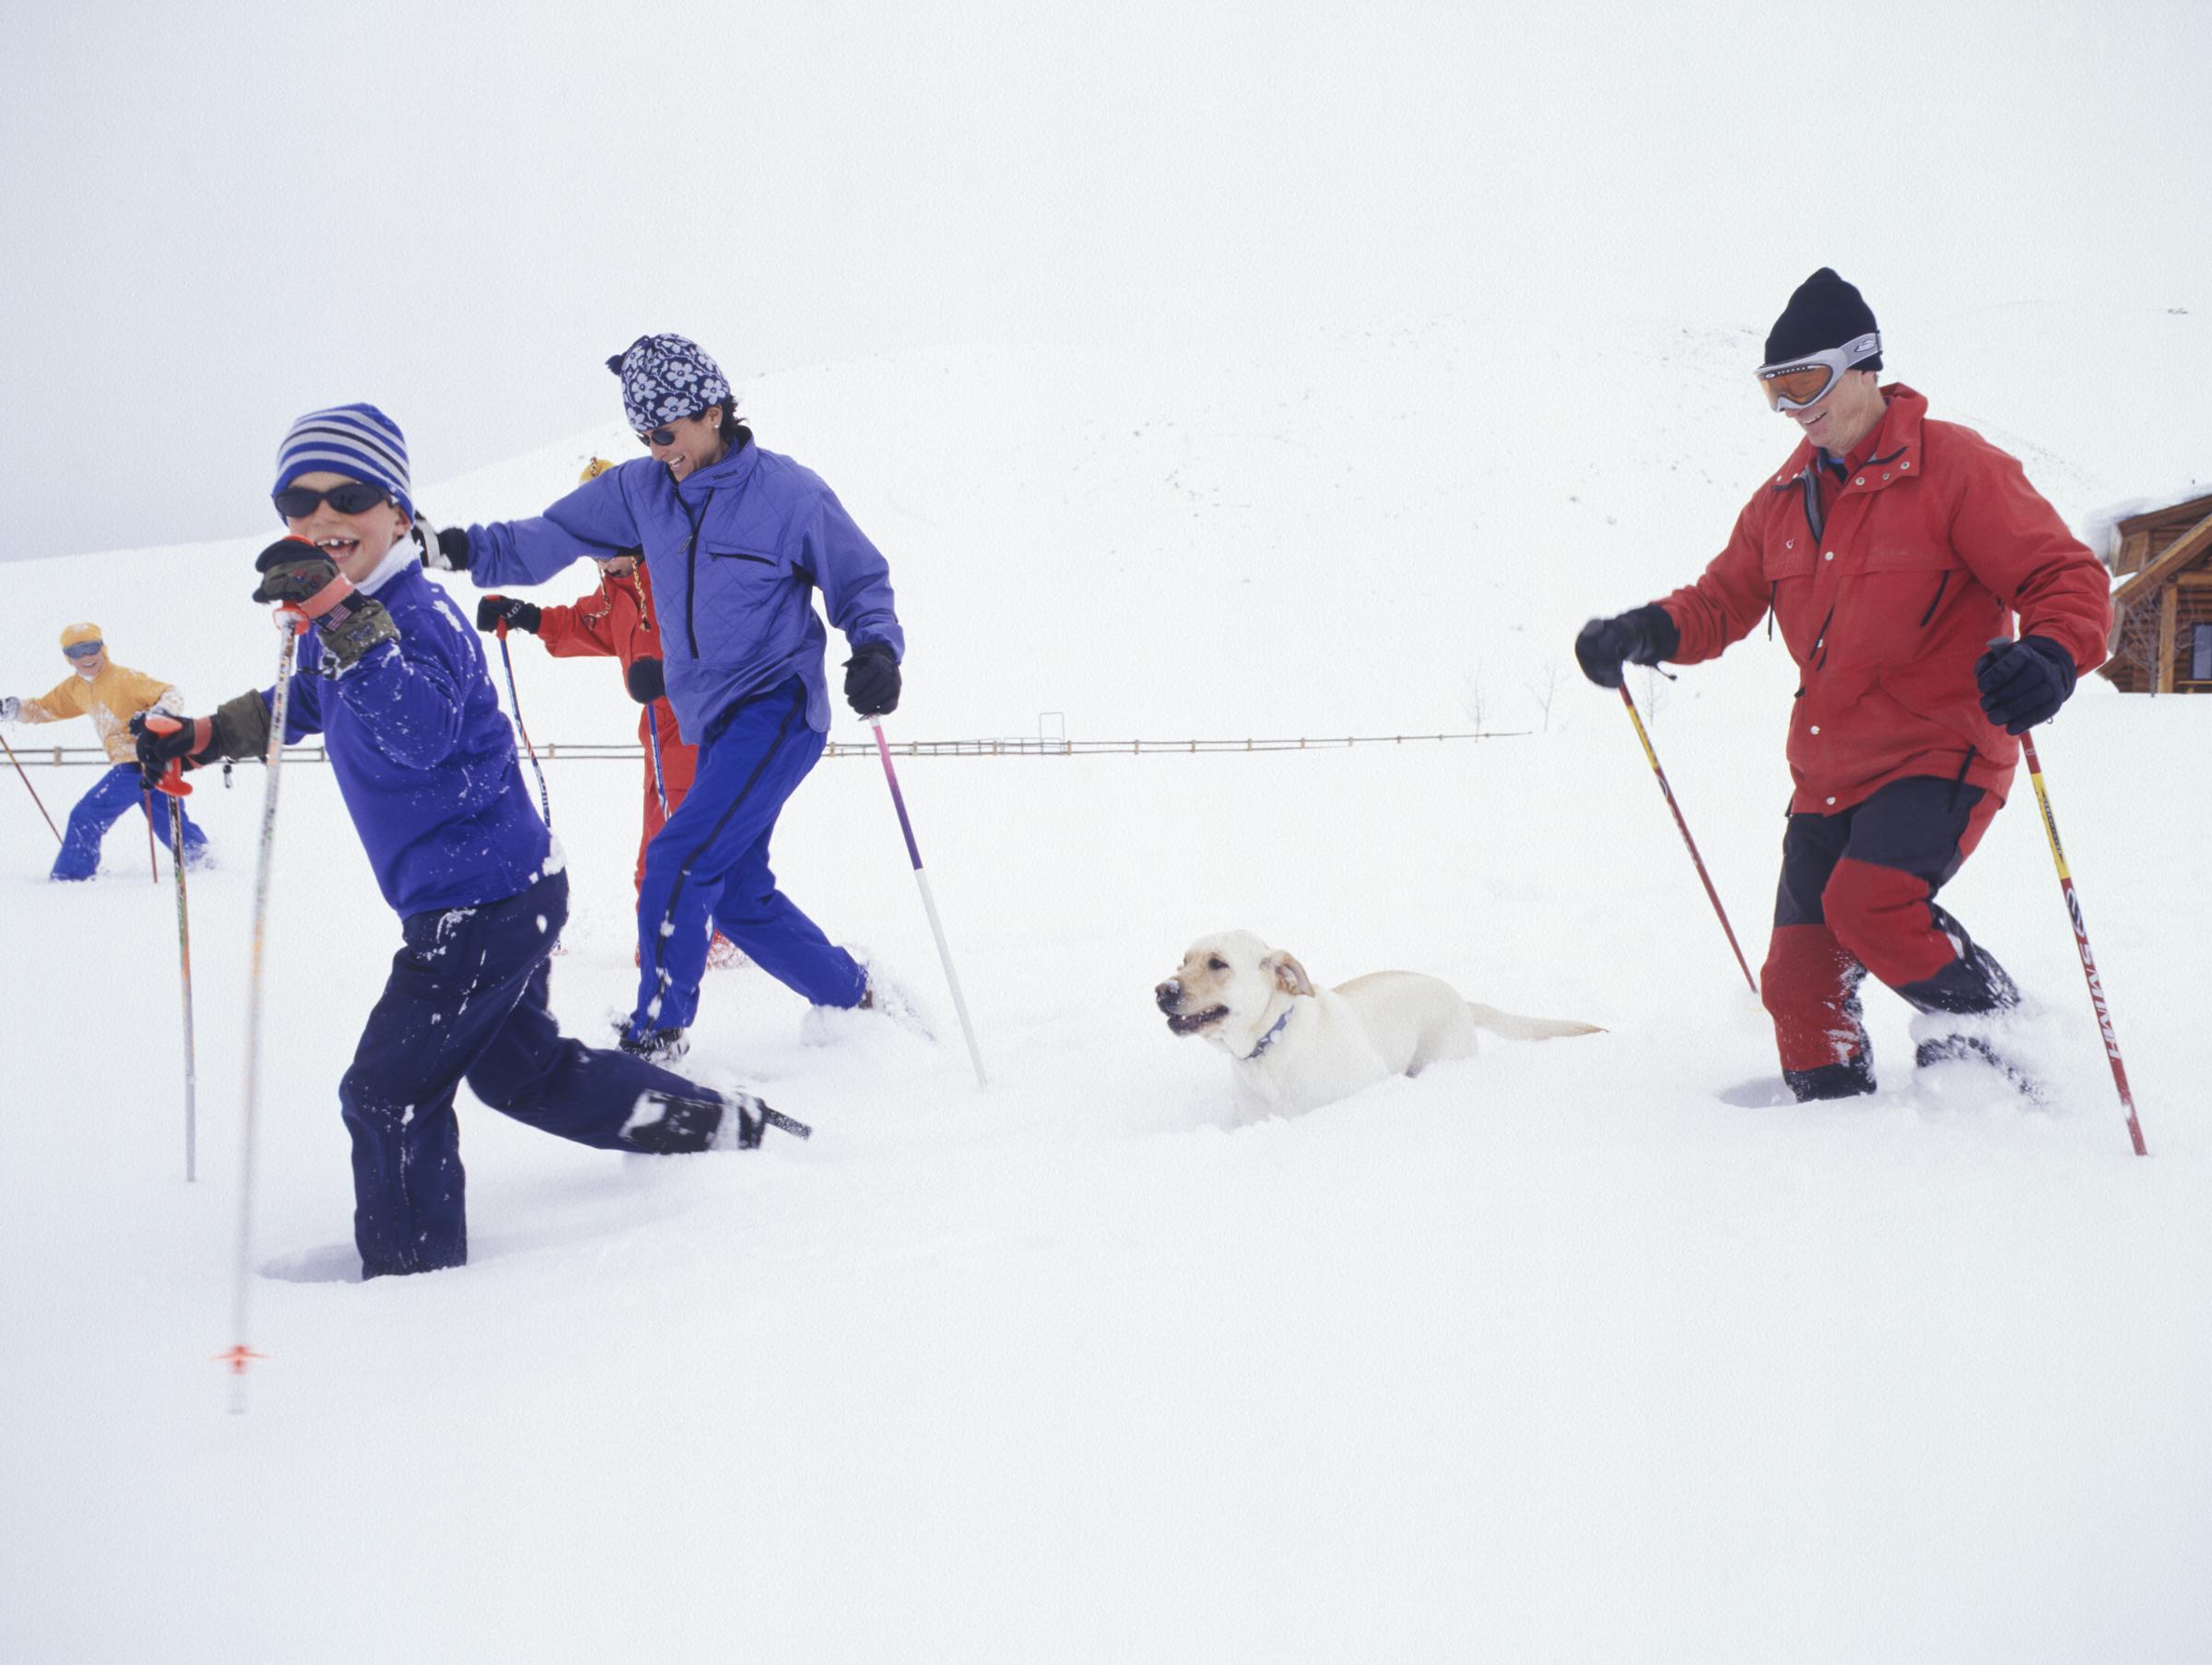 Ski Resorts That Welcome Dogs in Winter